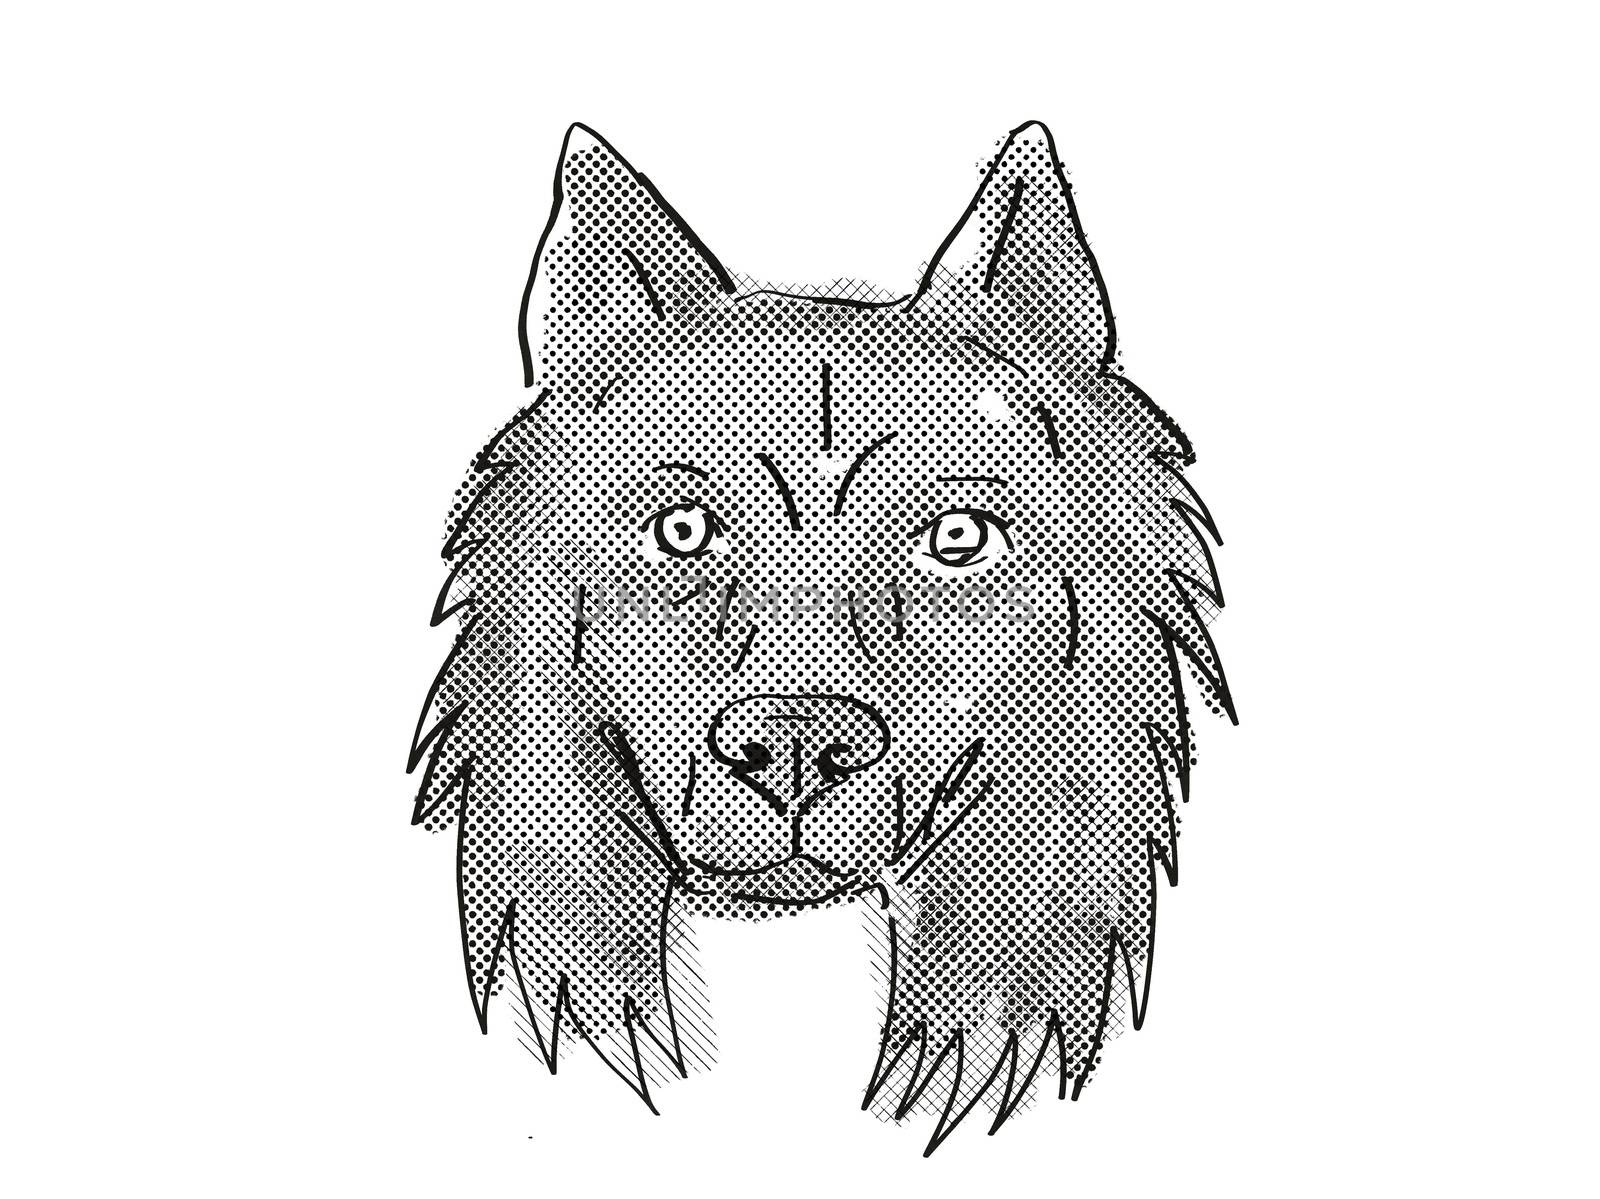 Retro cartoon style drawing of head of a Belgian Sheepdog, a domestic dog or canine breed on isolated white background done in black and white.